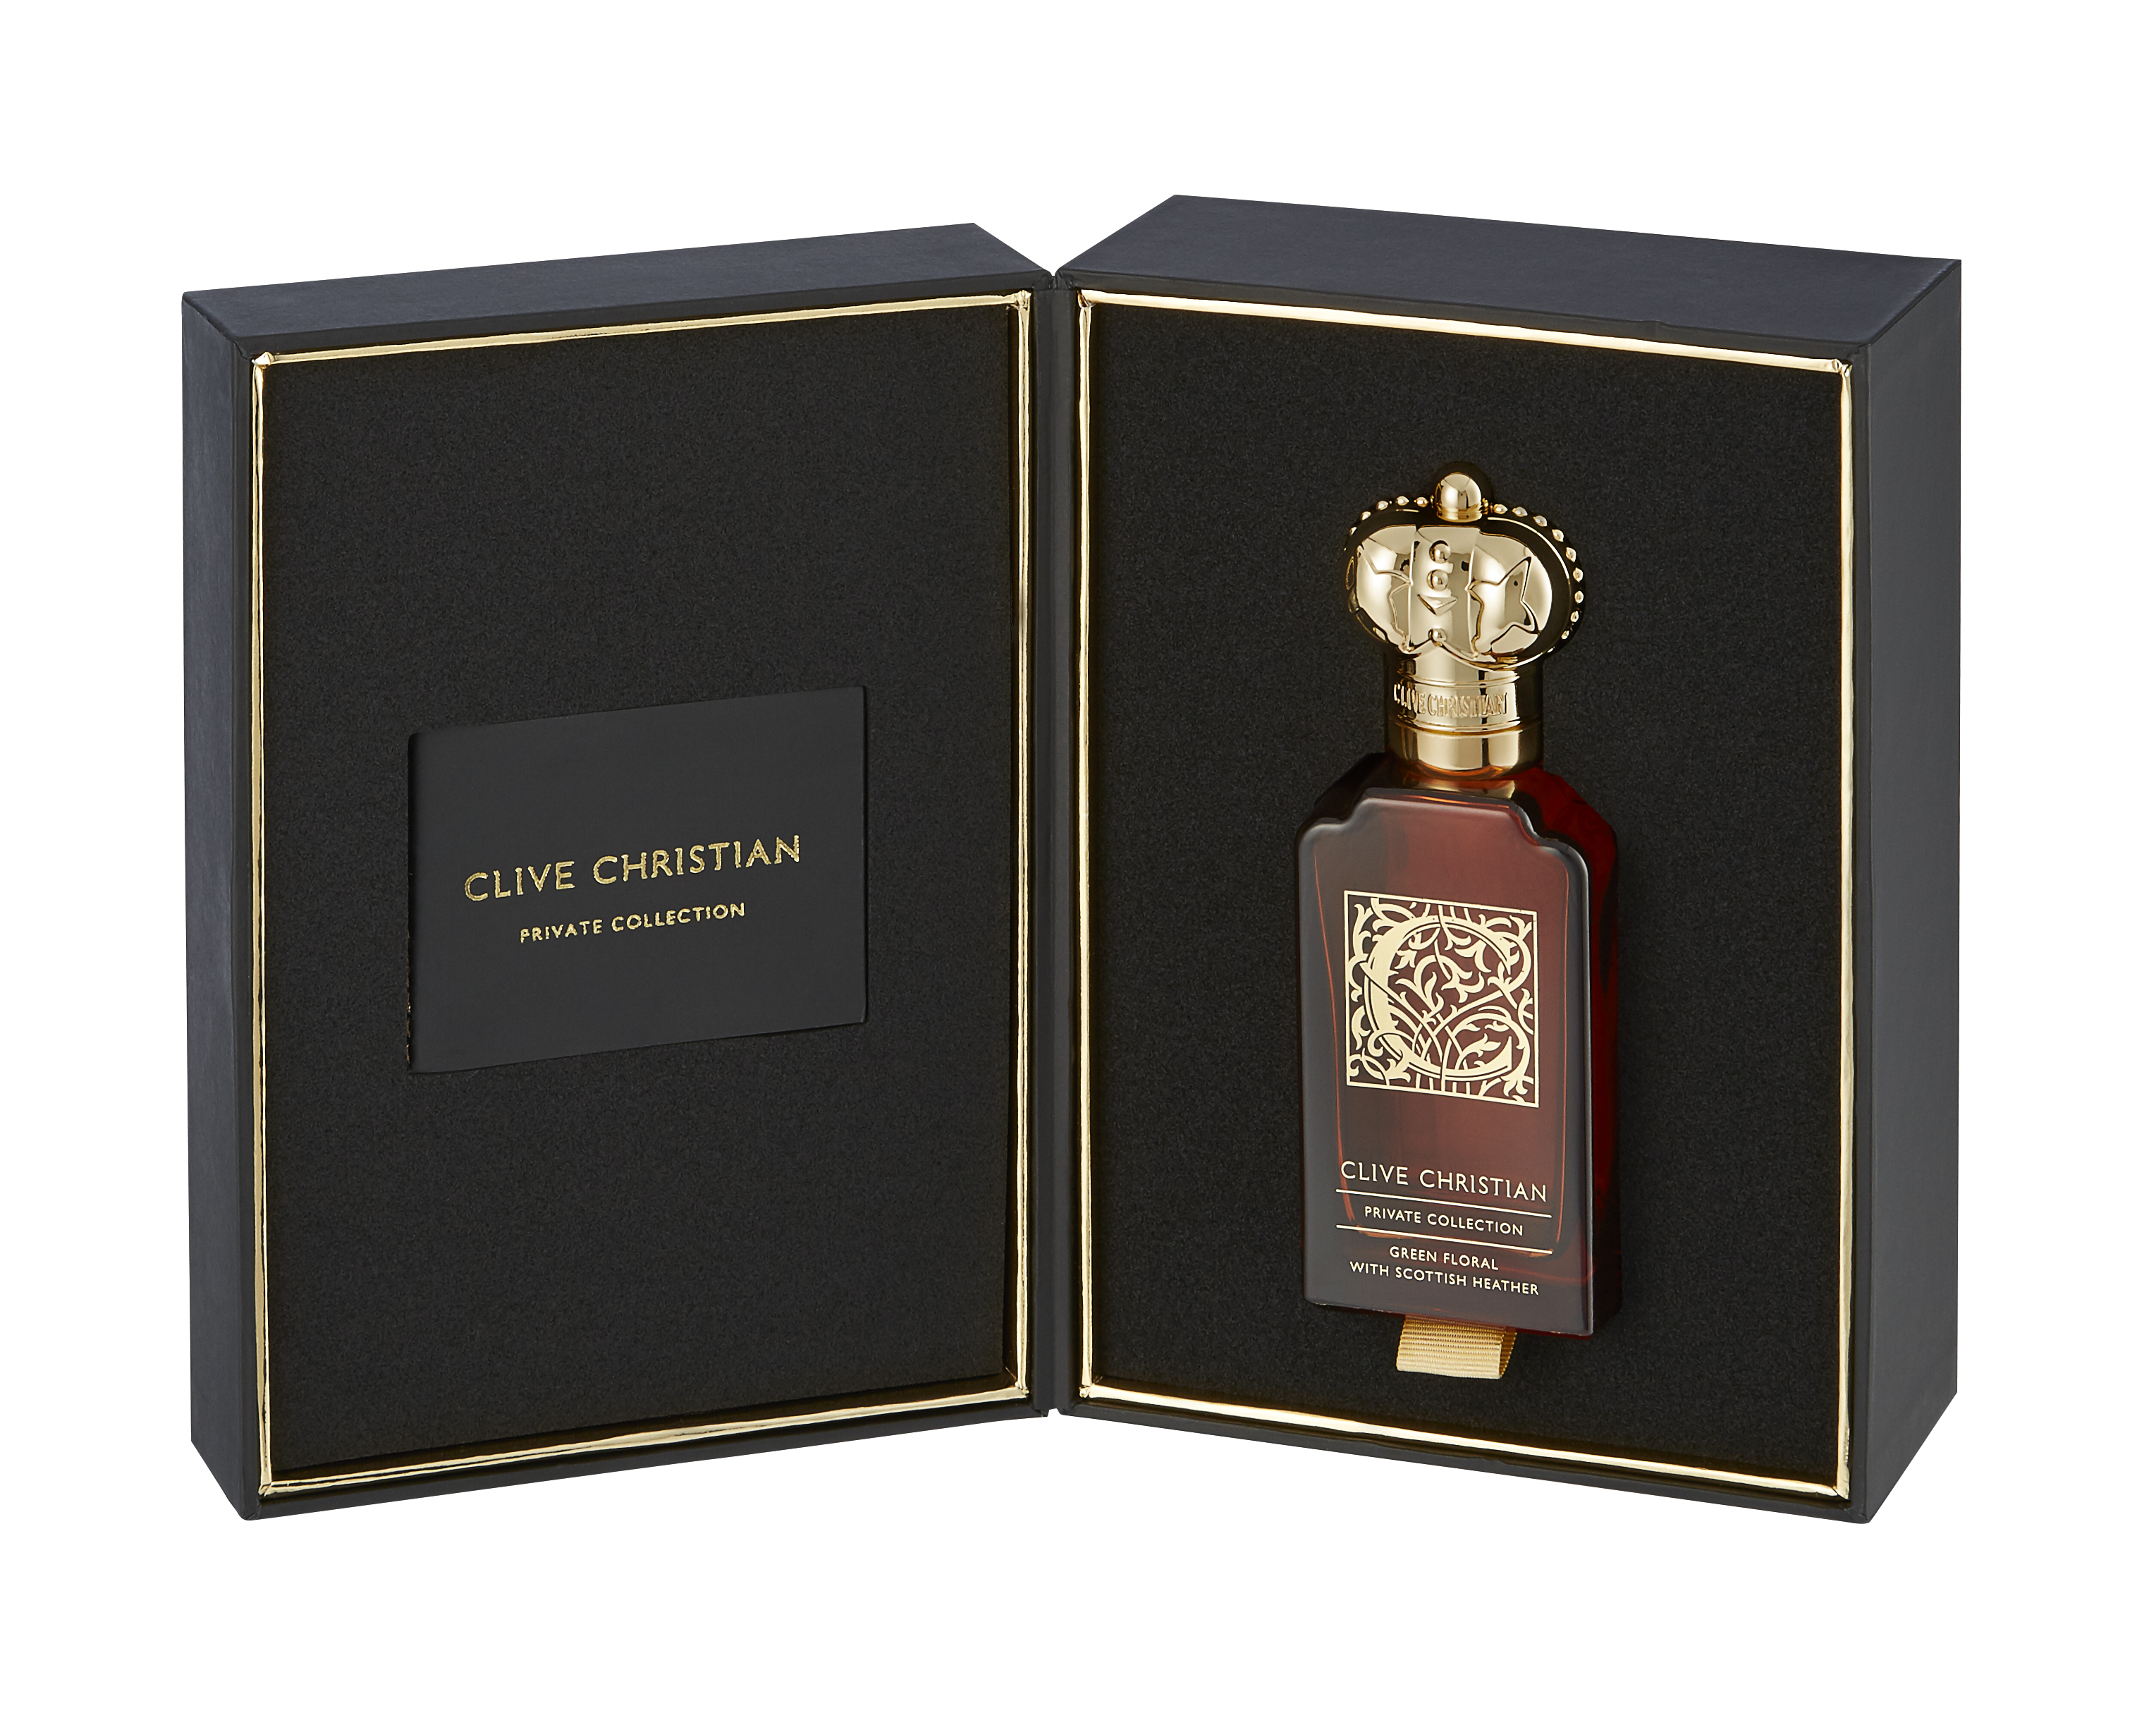 Клиф кристиан. Clive Christian private collection i Woody Floral feminine 50ml. Clive Christian e for men Gourmand oriental with Sweet Clove. Clive Christian духи. Clive Christian l for women Floral Chypre with Rich Patchouli.